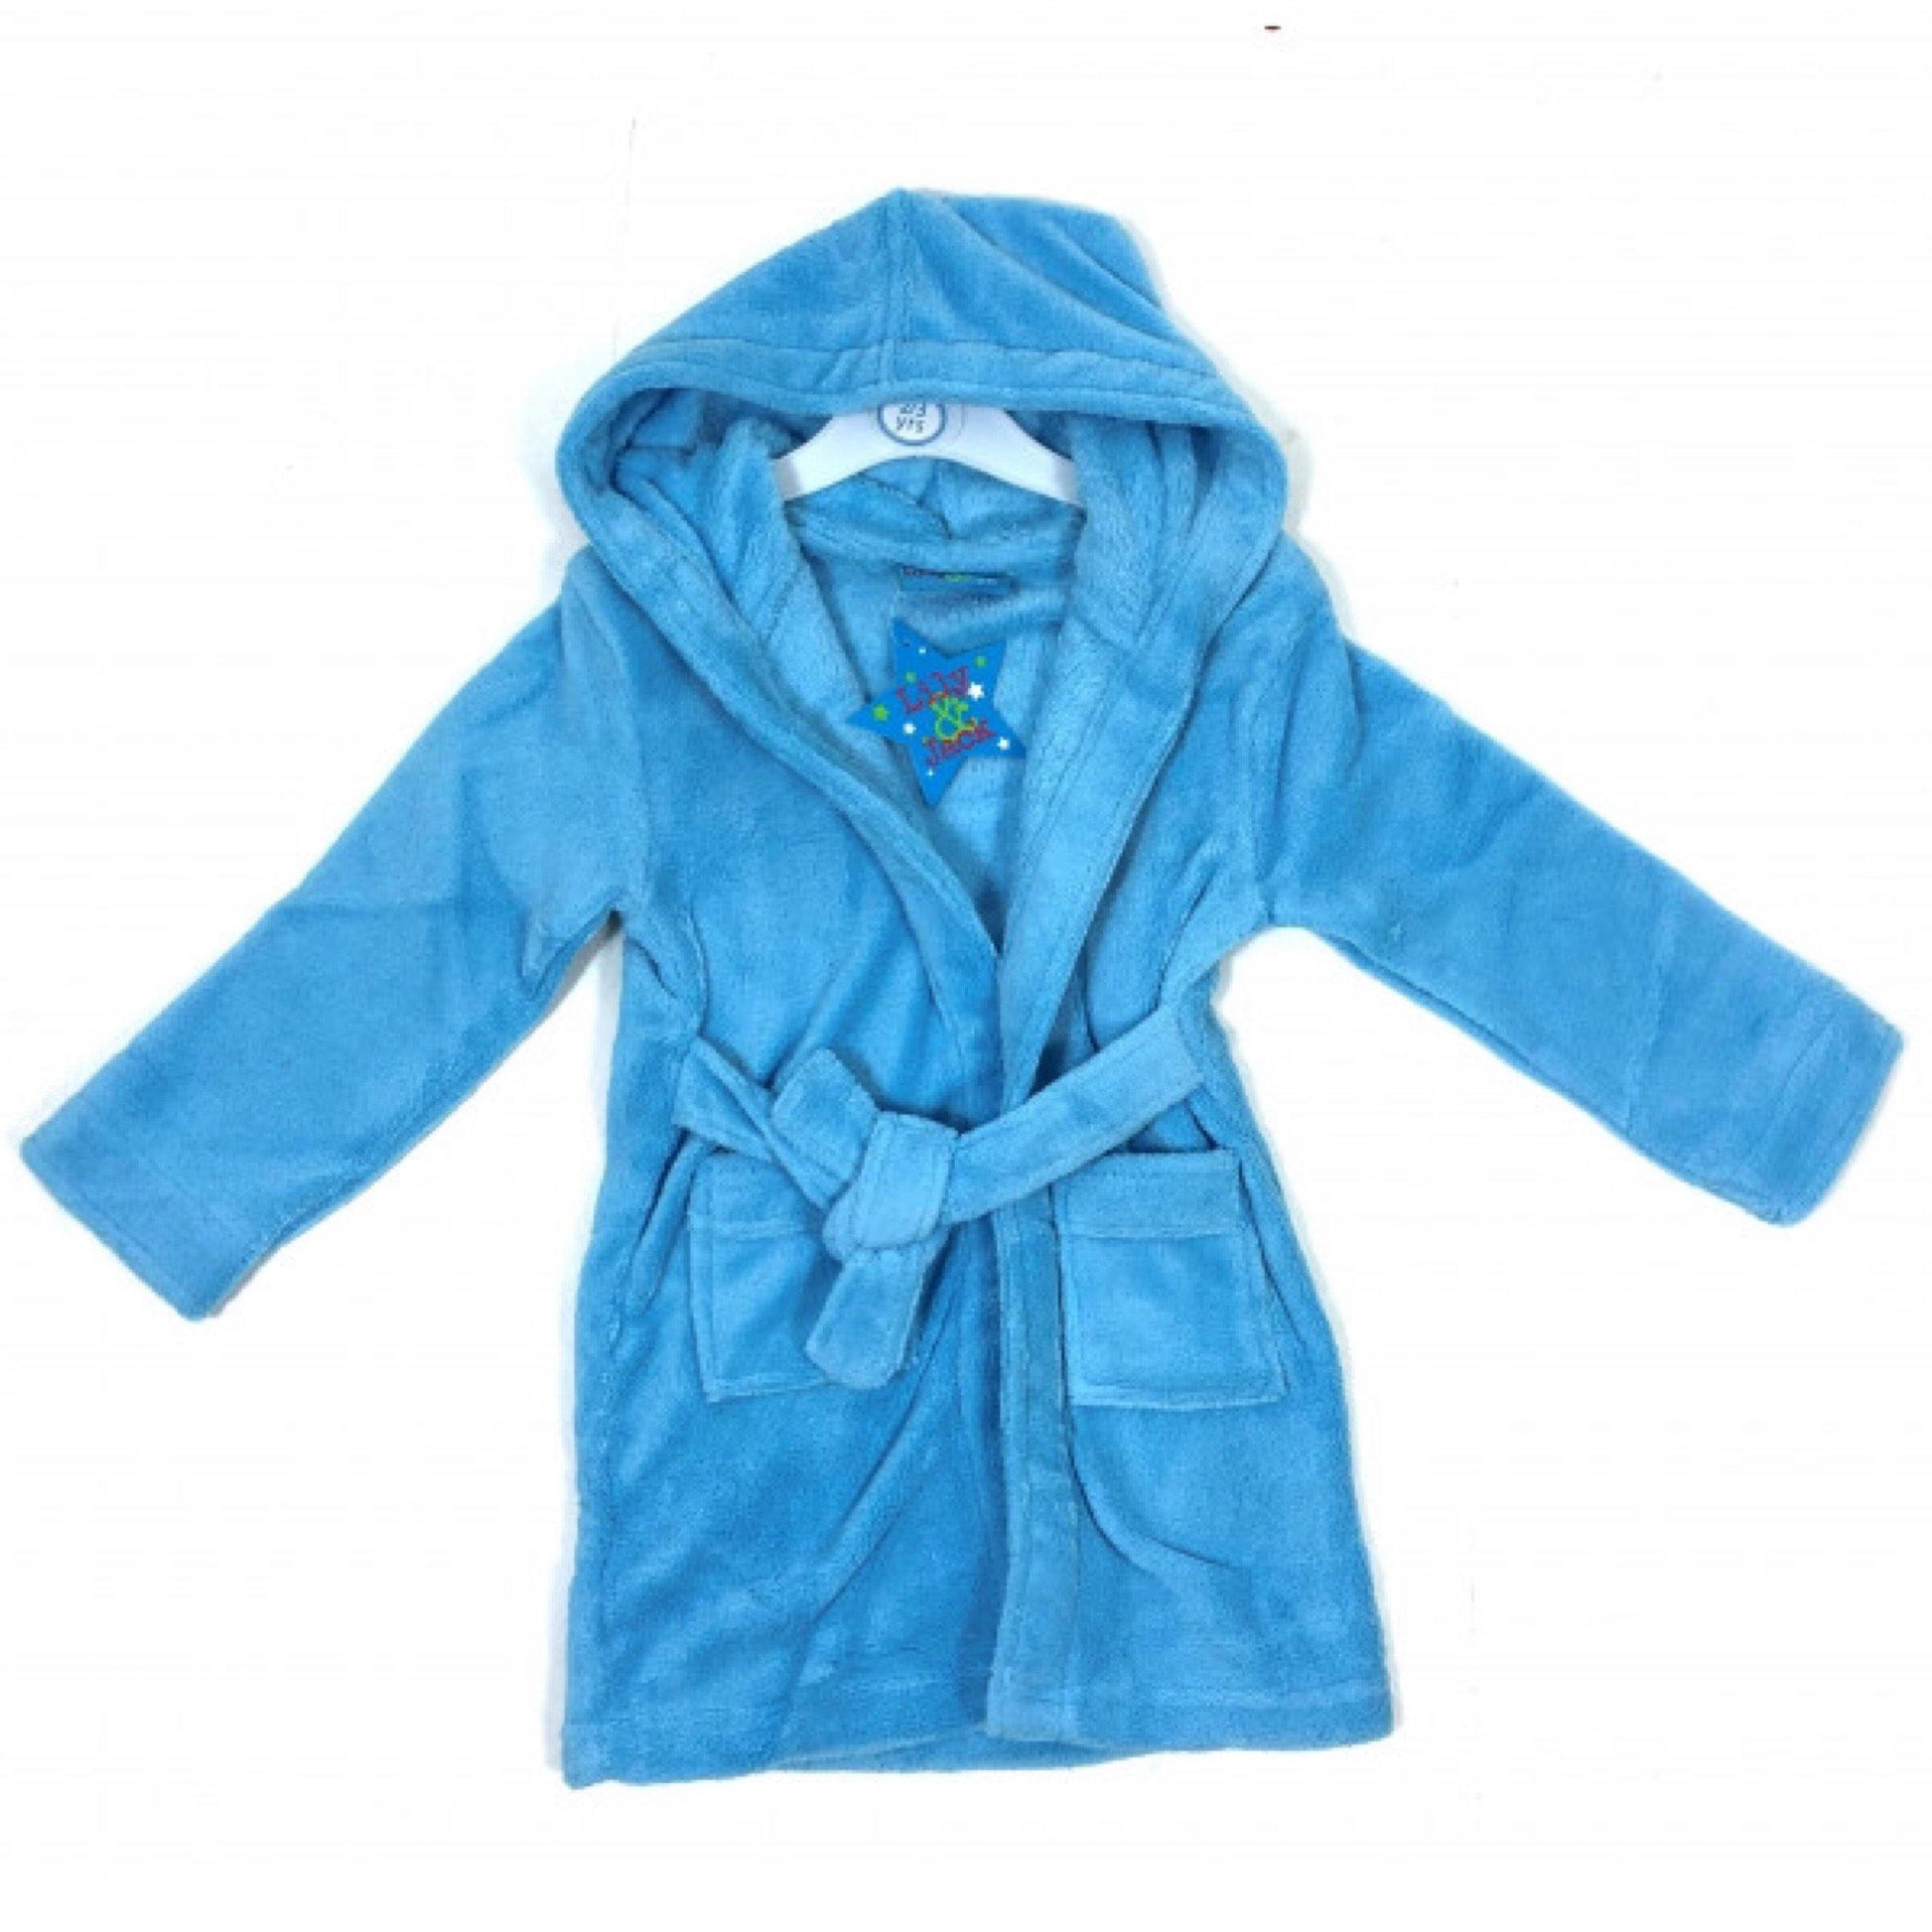 Boys Blue Dressing Gown | Oscar & Me | Baby & Children’s Clothing & Accessories